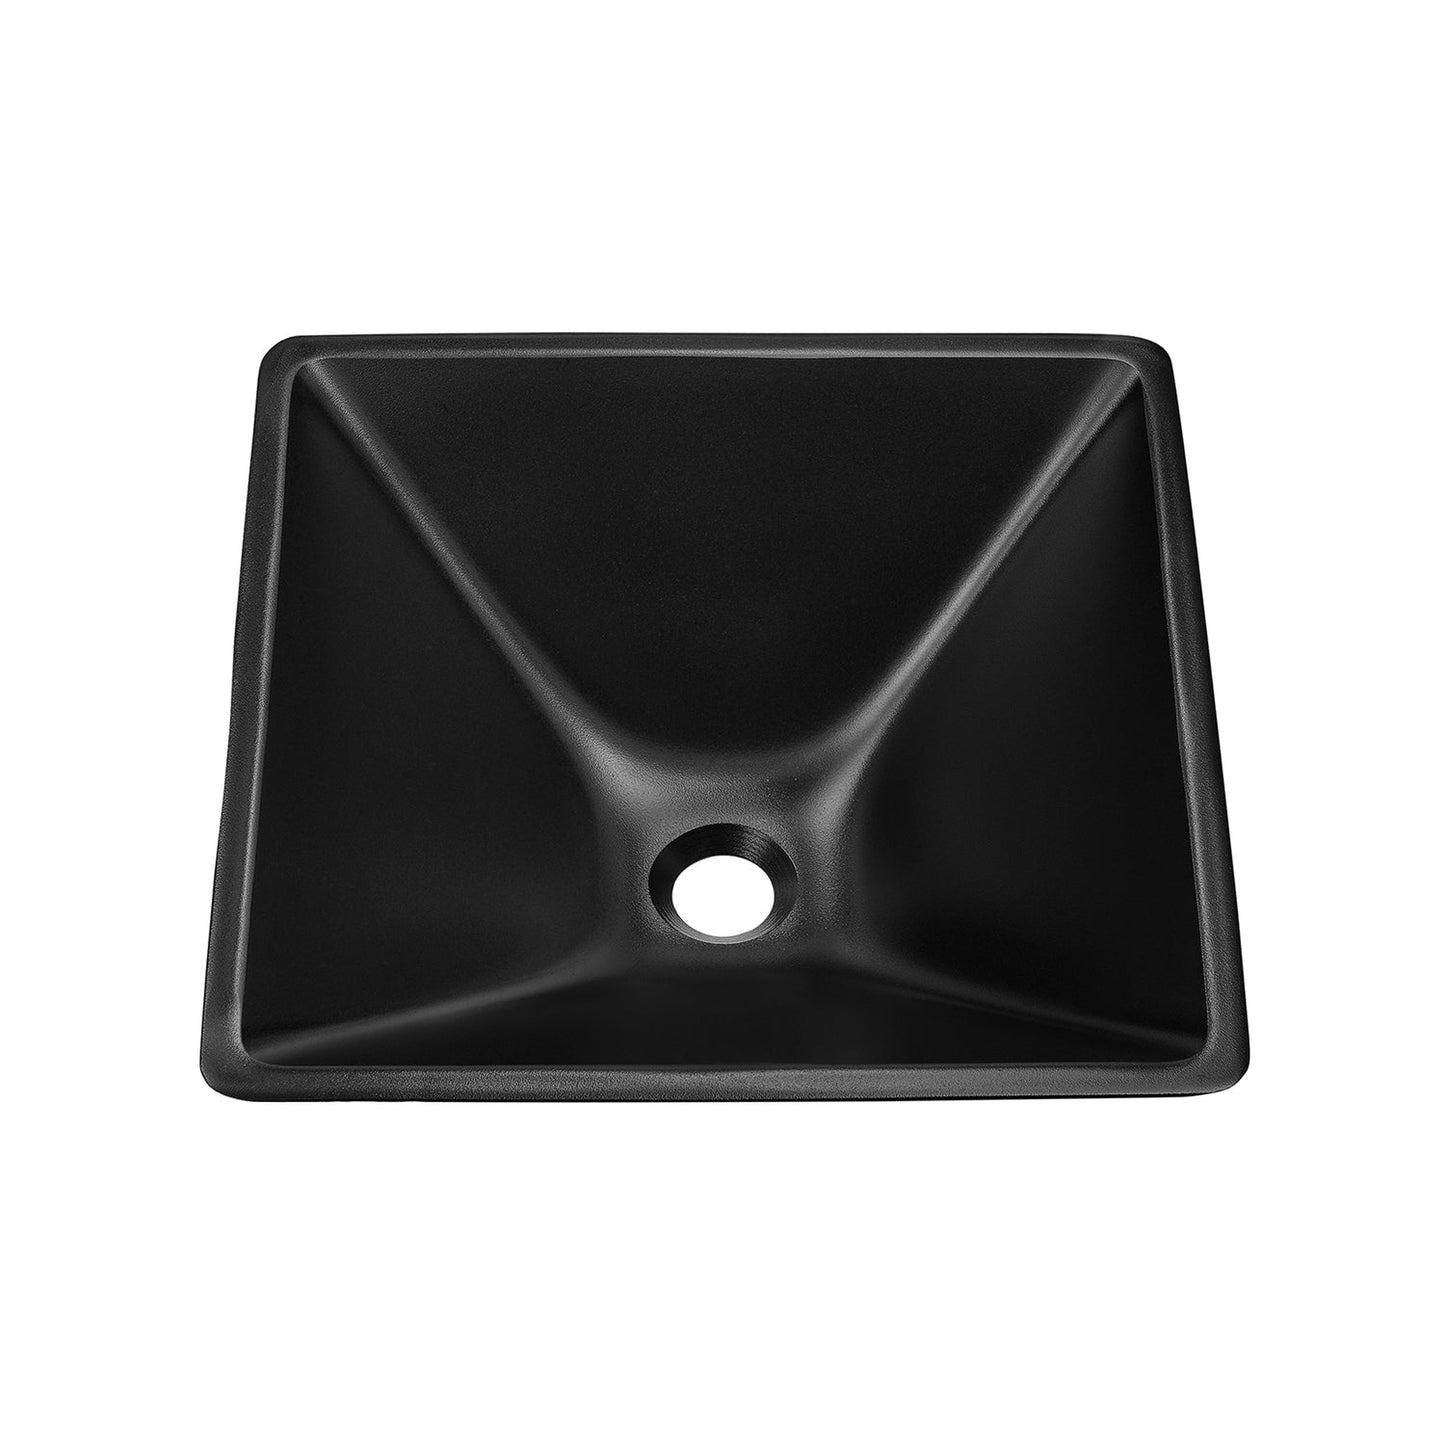 Swiss Madison Claire 16" x 16" Black Squared Tempered Glass Bathroom Vessel Sink